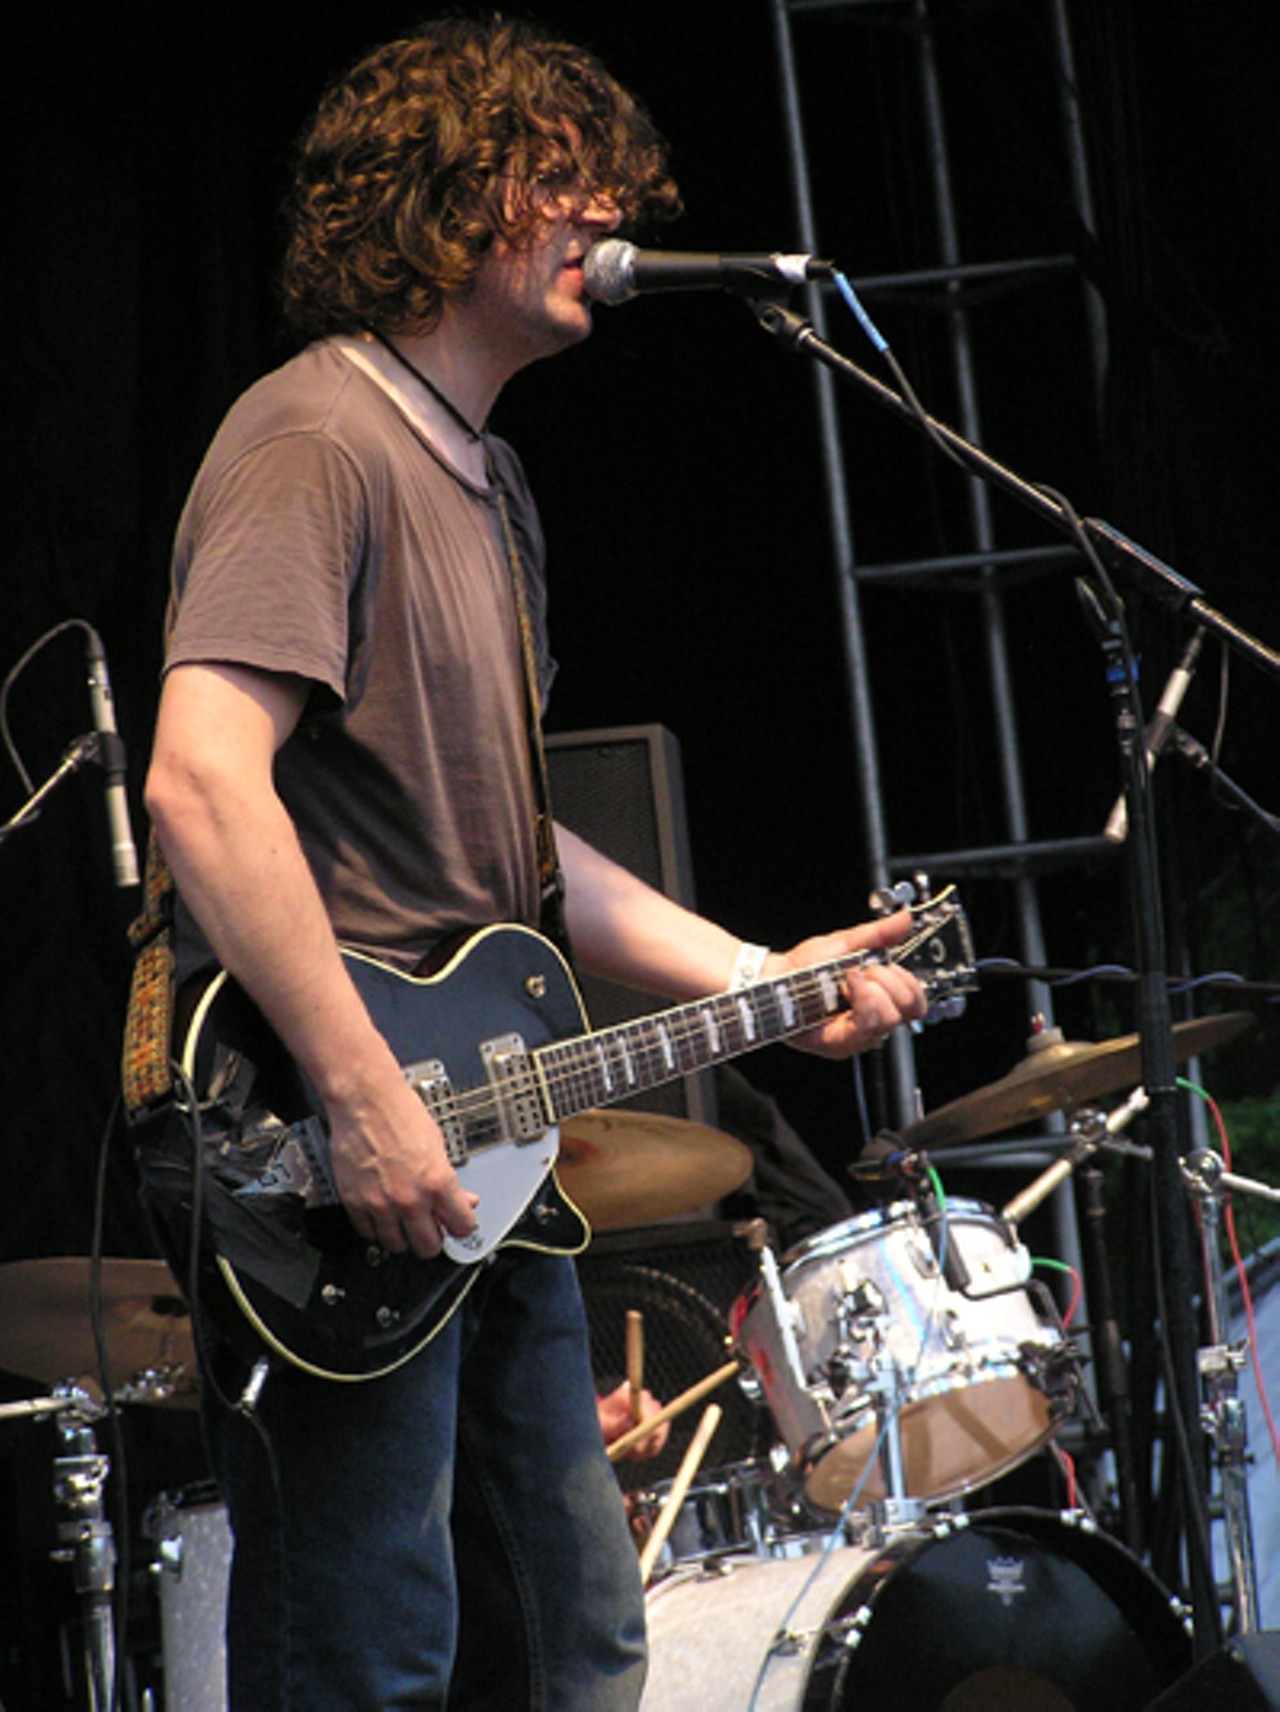 Keeping with the annual full-album theme for opening night, Sebadoh performed Bubble and Scrape in the mid-slot.